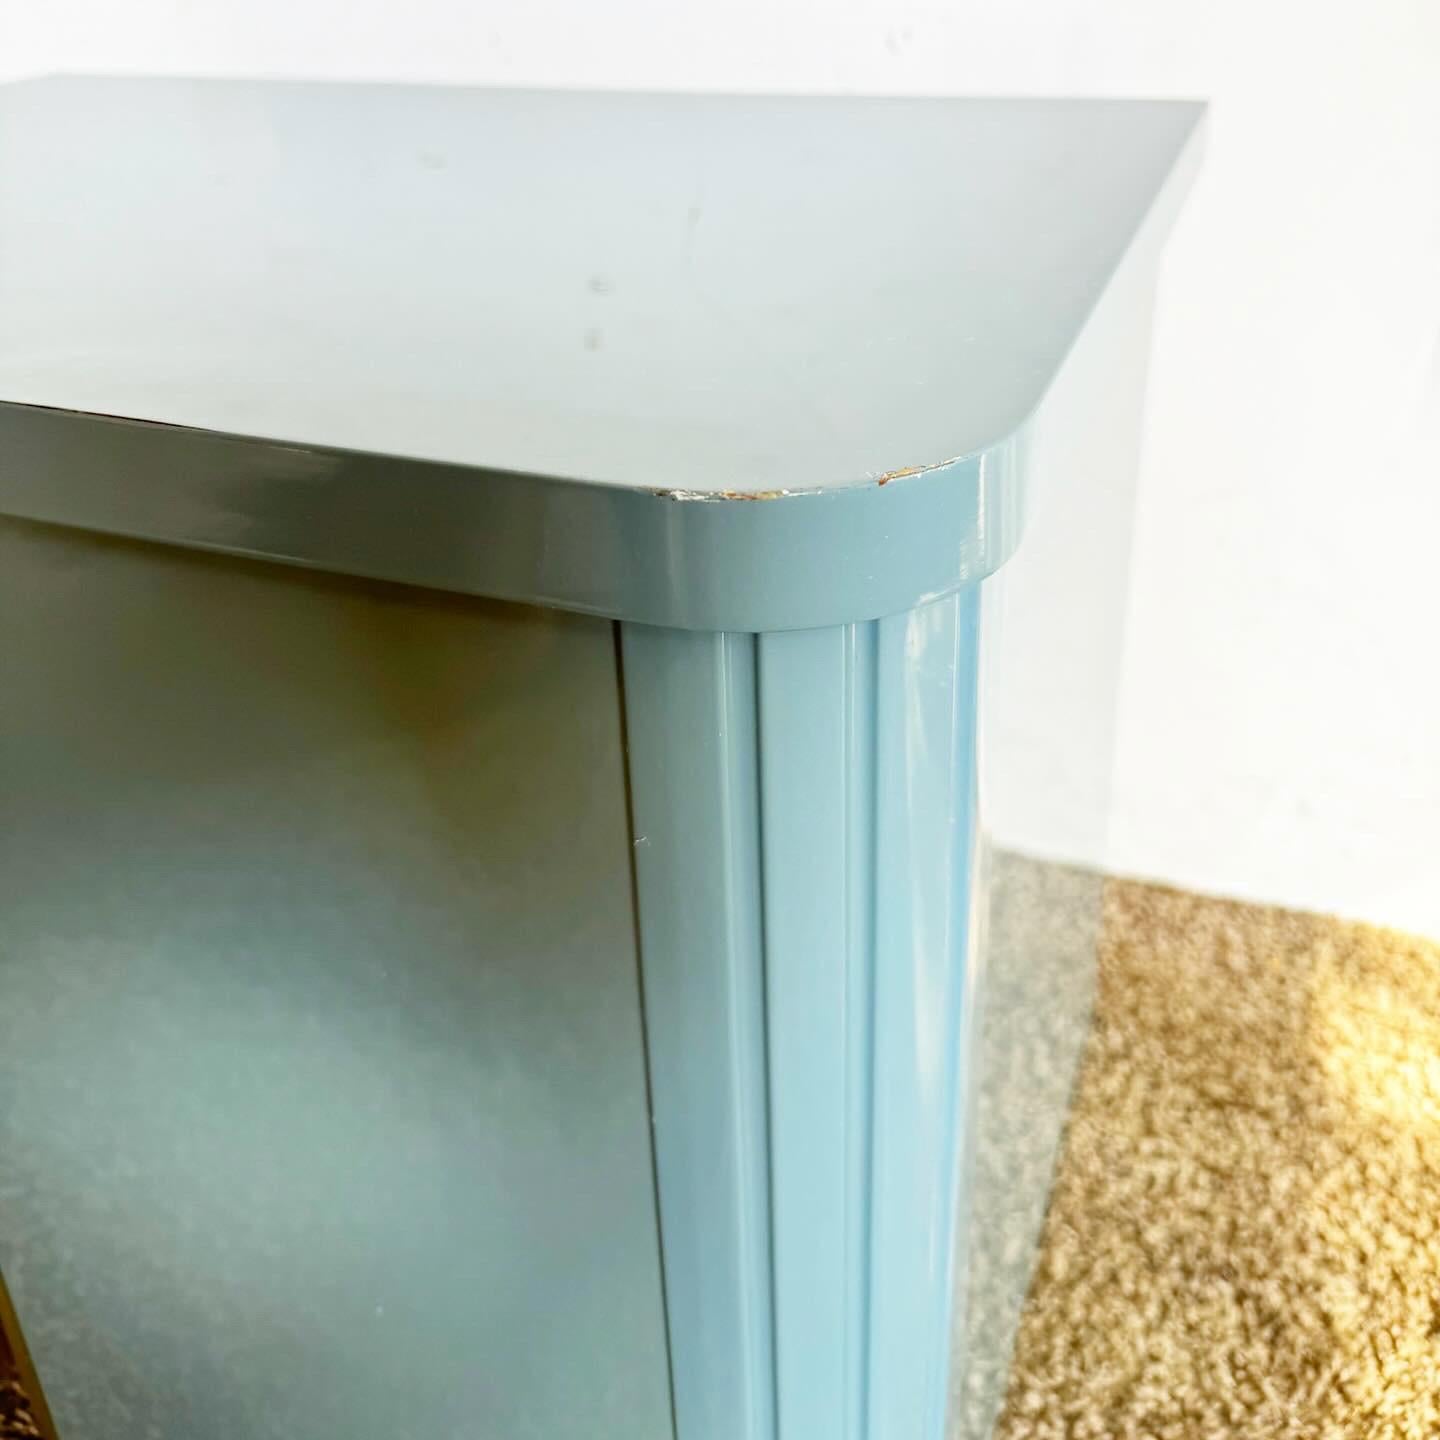 Italian Postmodern Baby Blue Lacquered Nightstands With Gold Accents – a Pair For Sale 1